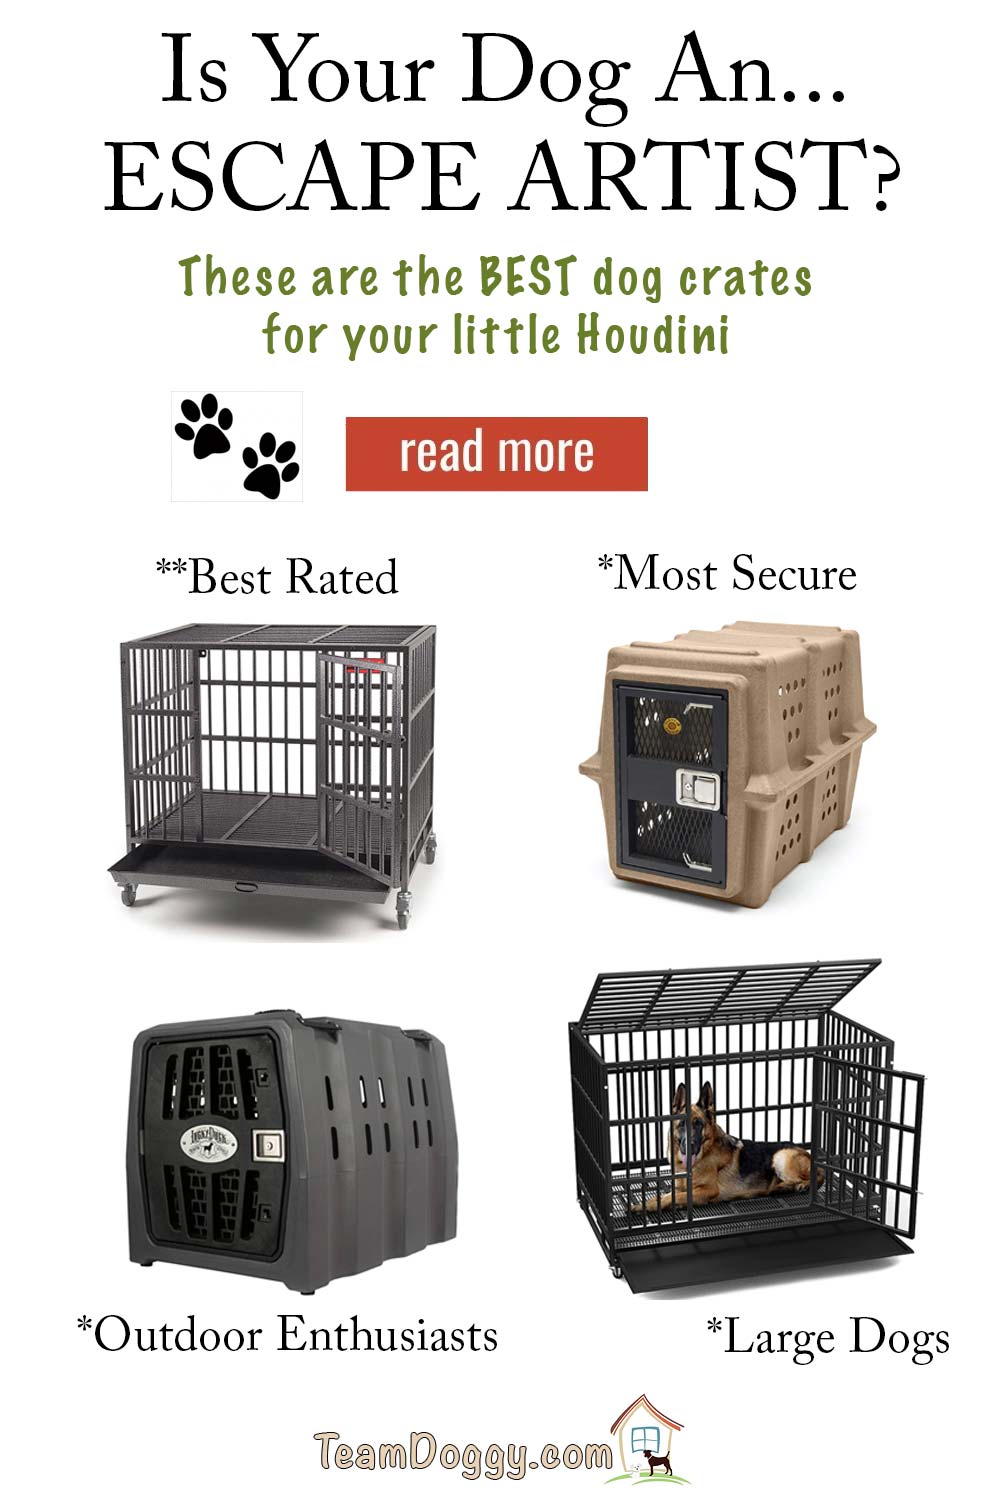 I tried one of these escape-proof dog crates for my escape artist dog. He is now calm and content in his kennel. #dogcaretips